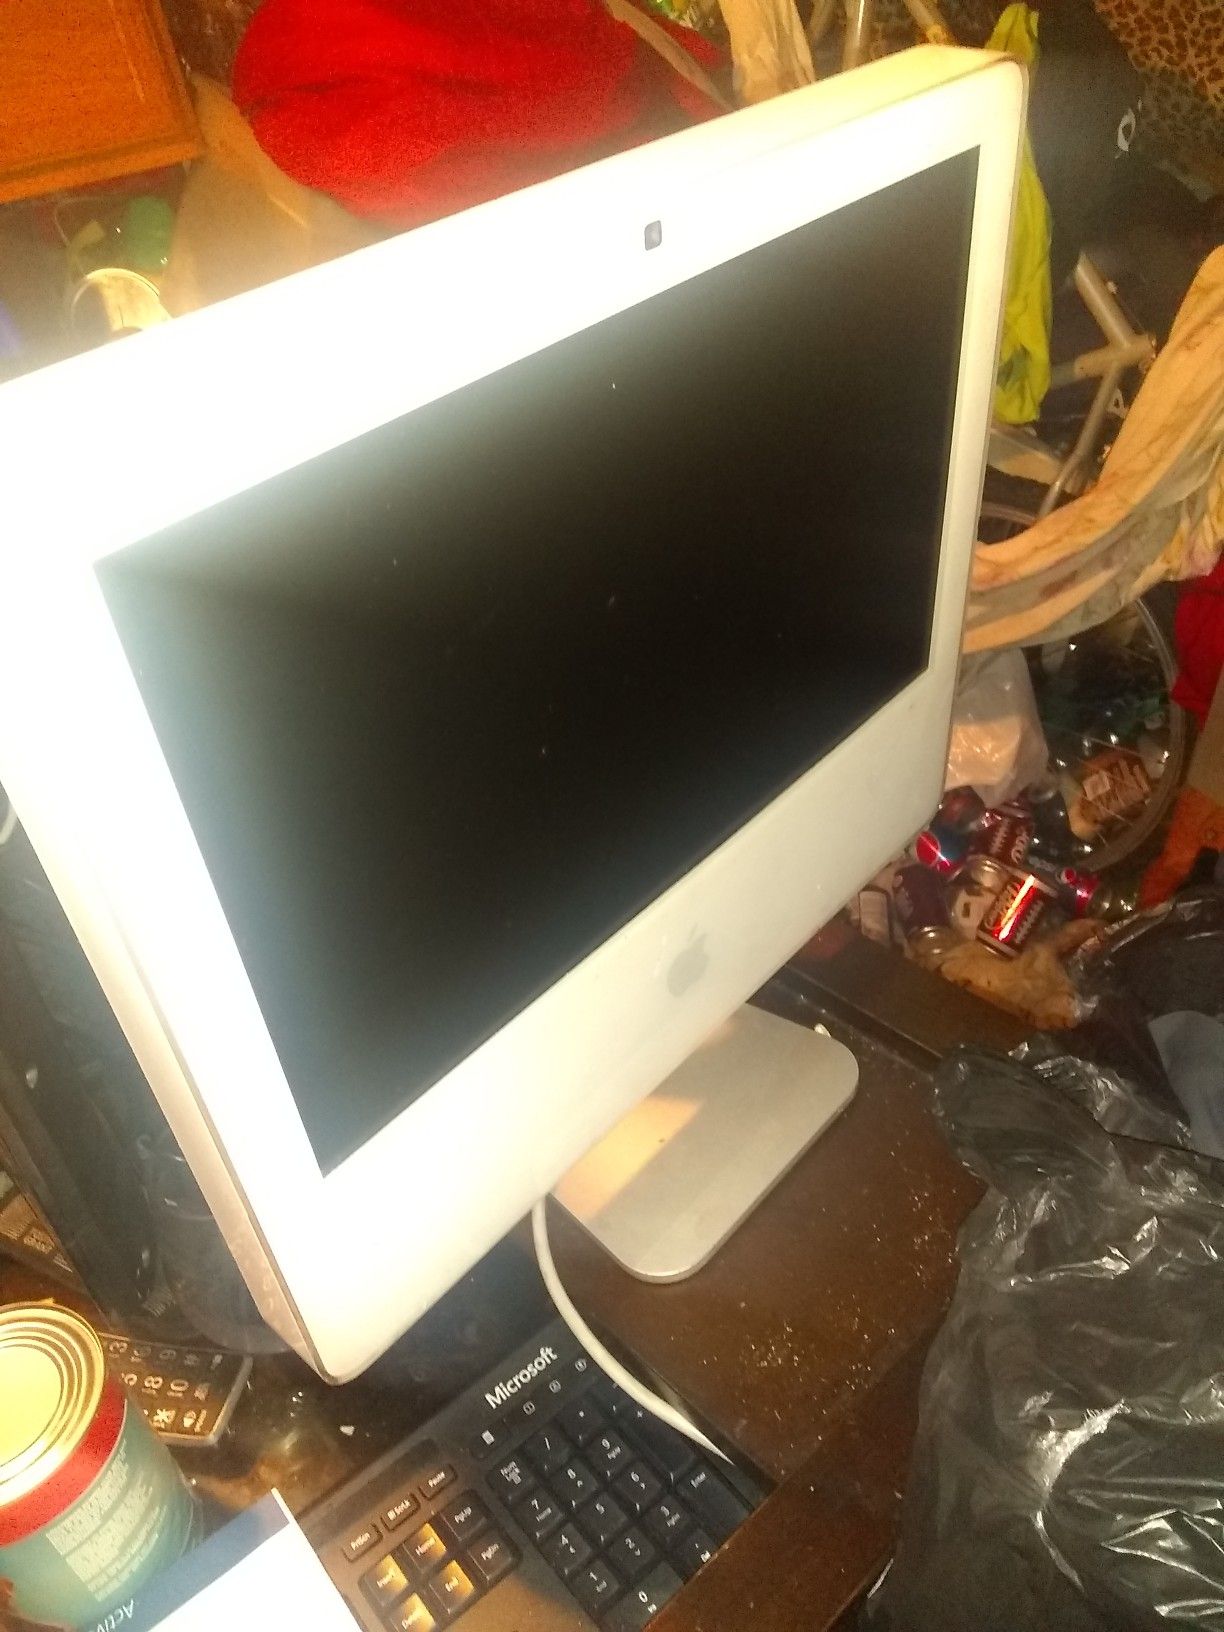 Imac 2015 Quick Mac Runs smooth mainly used for Computer Games An Recording Muisc I'm looking For 200 obo comes with power cord make me an offer